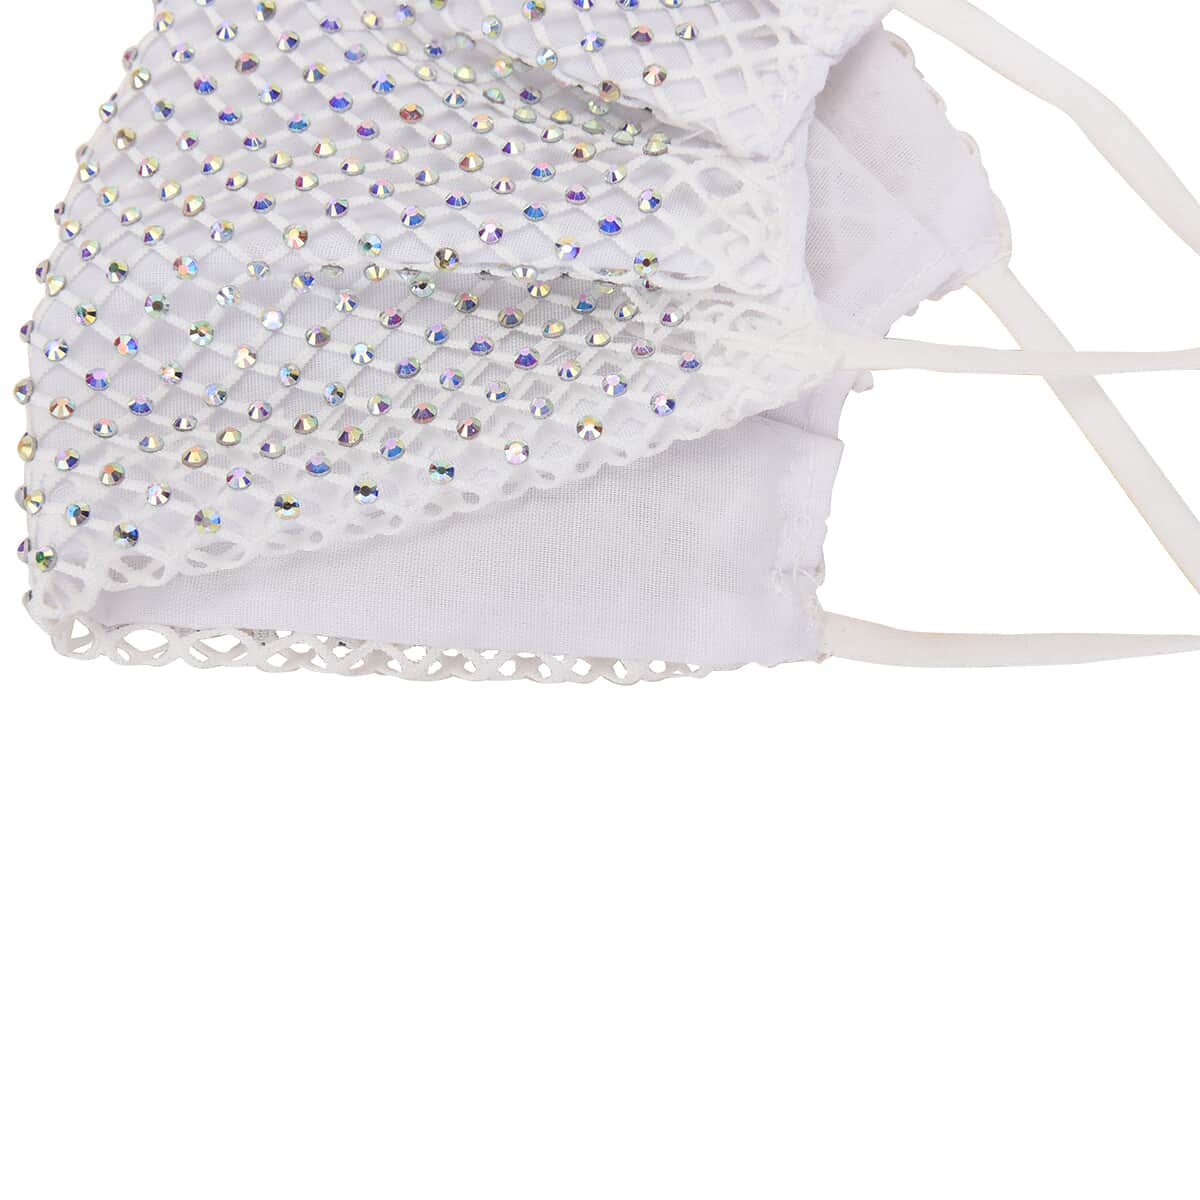 White Mesh with Sparkling Color Crystals Rhinestone 2 Ply Fashion Mask (Non-Returnable) image number 3